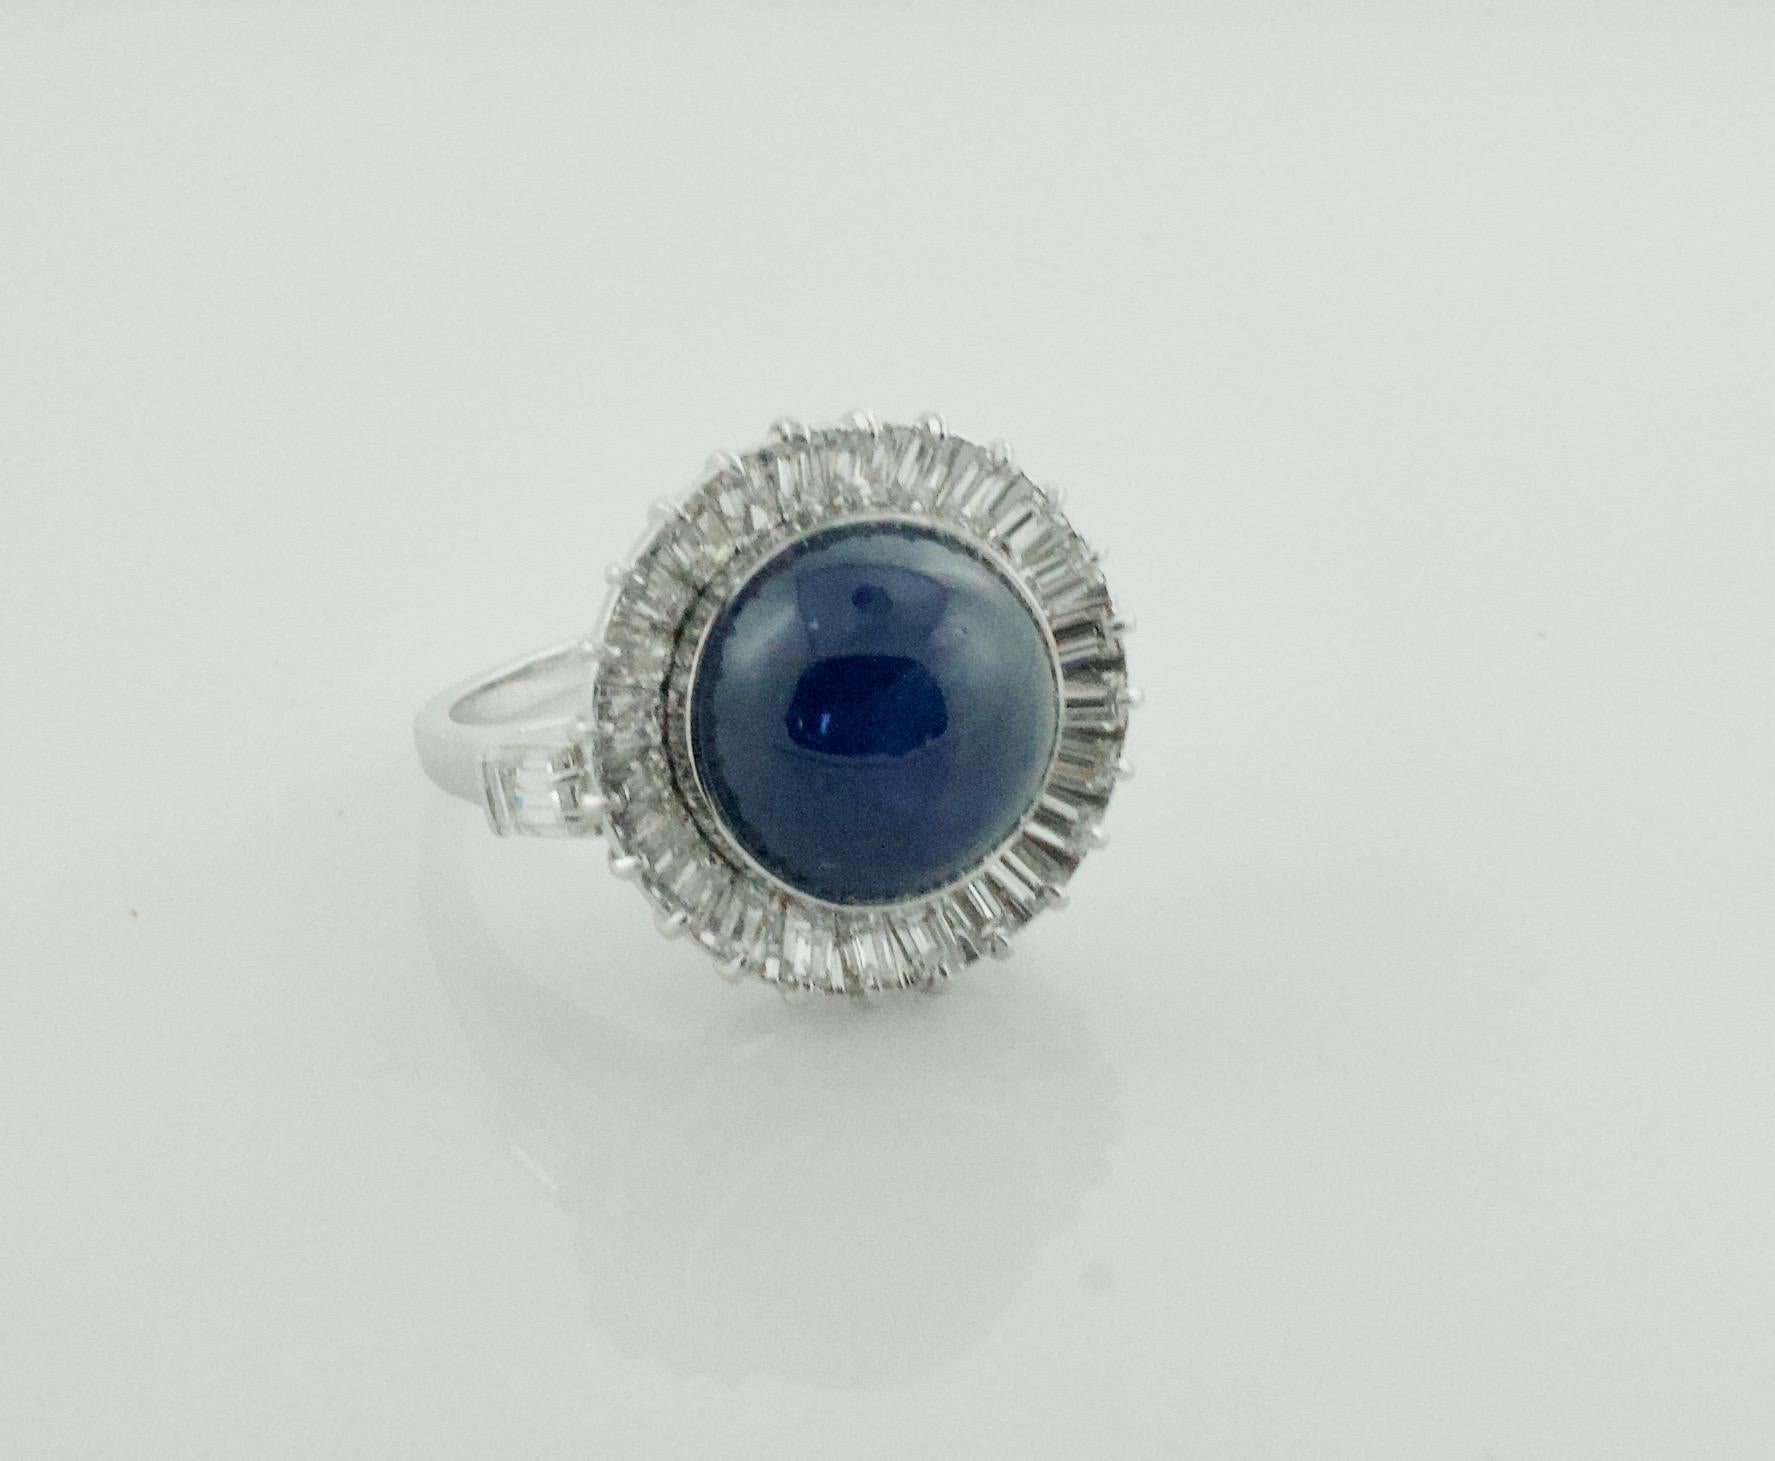 Blue Star Sapphire and Diamond Ring in Platinum circa 1950's
A Rare Deep Blue Round Cabochon Weighing 11.75 Carats Approximately. Very Nice Star Which is Rare in The Deep Blue Stars. 
27 Baguette Cut Diamonds Weighing 1.50 Carats Approximately [GH